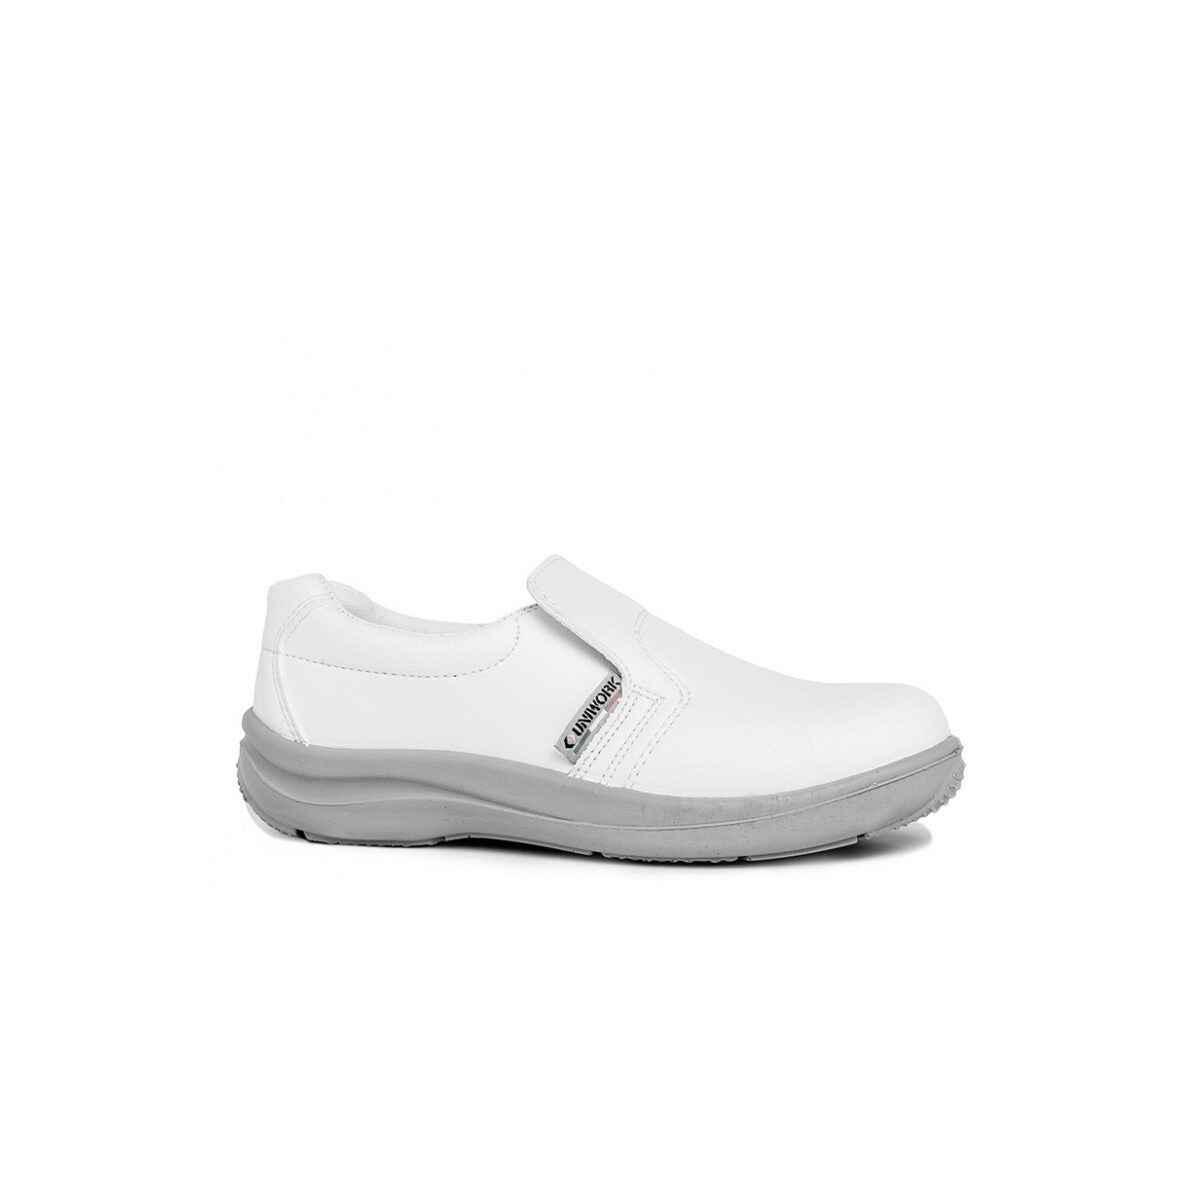 CHAUSSURE SECURIT  MIXTE BLANC TAILLE 43